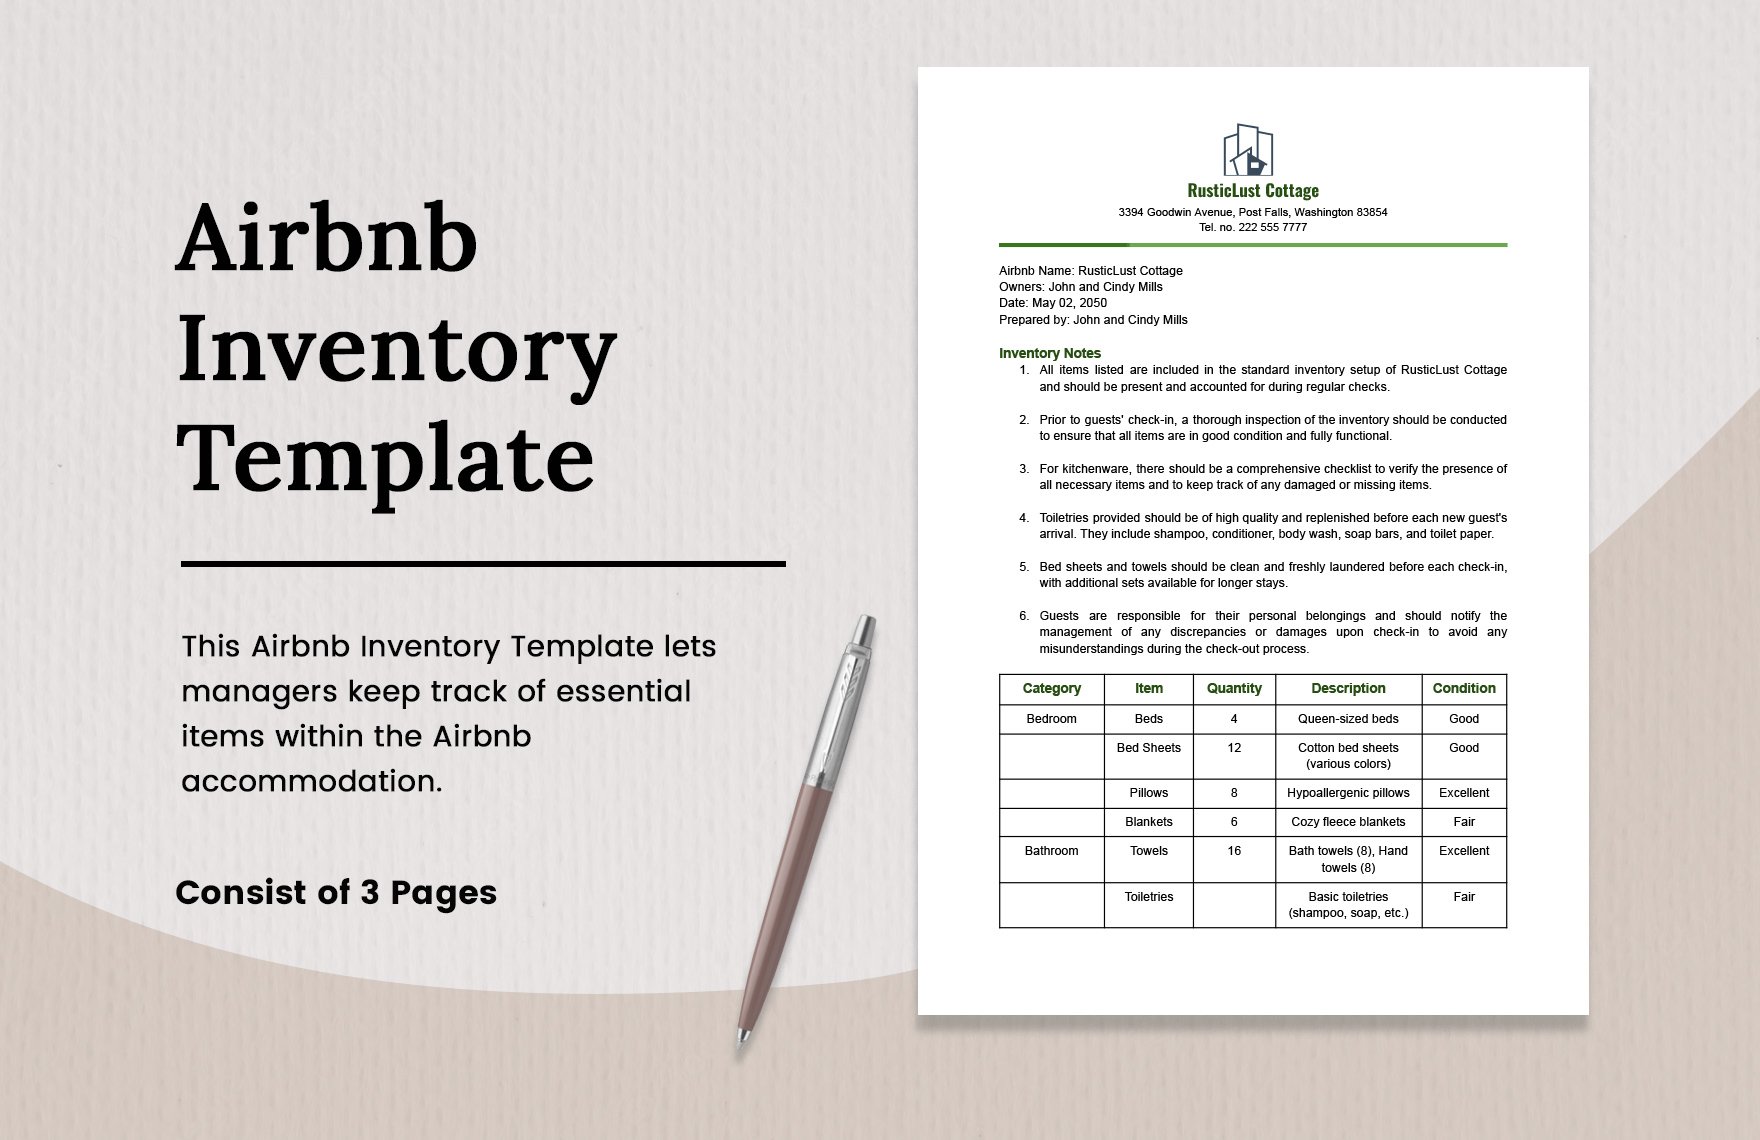 airbnb-inventory-template